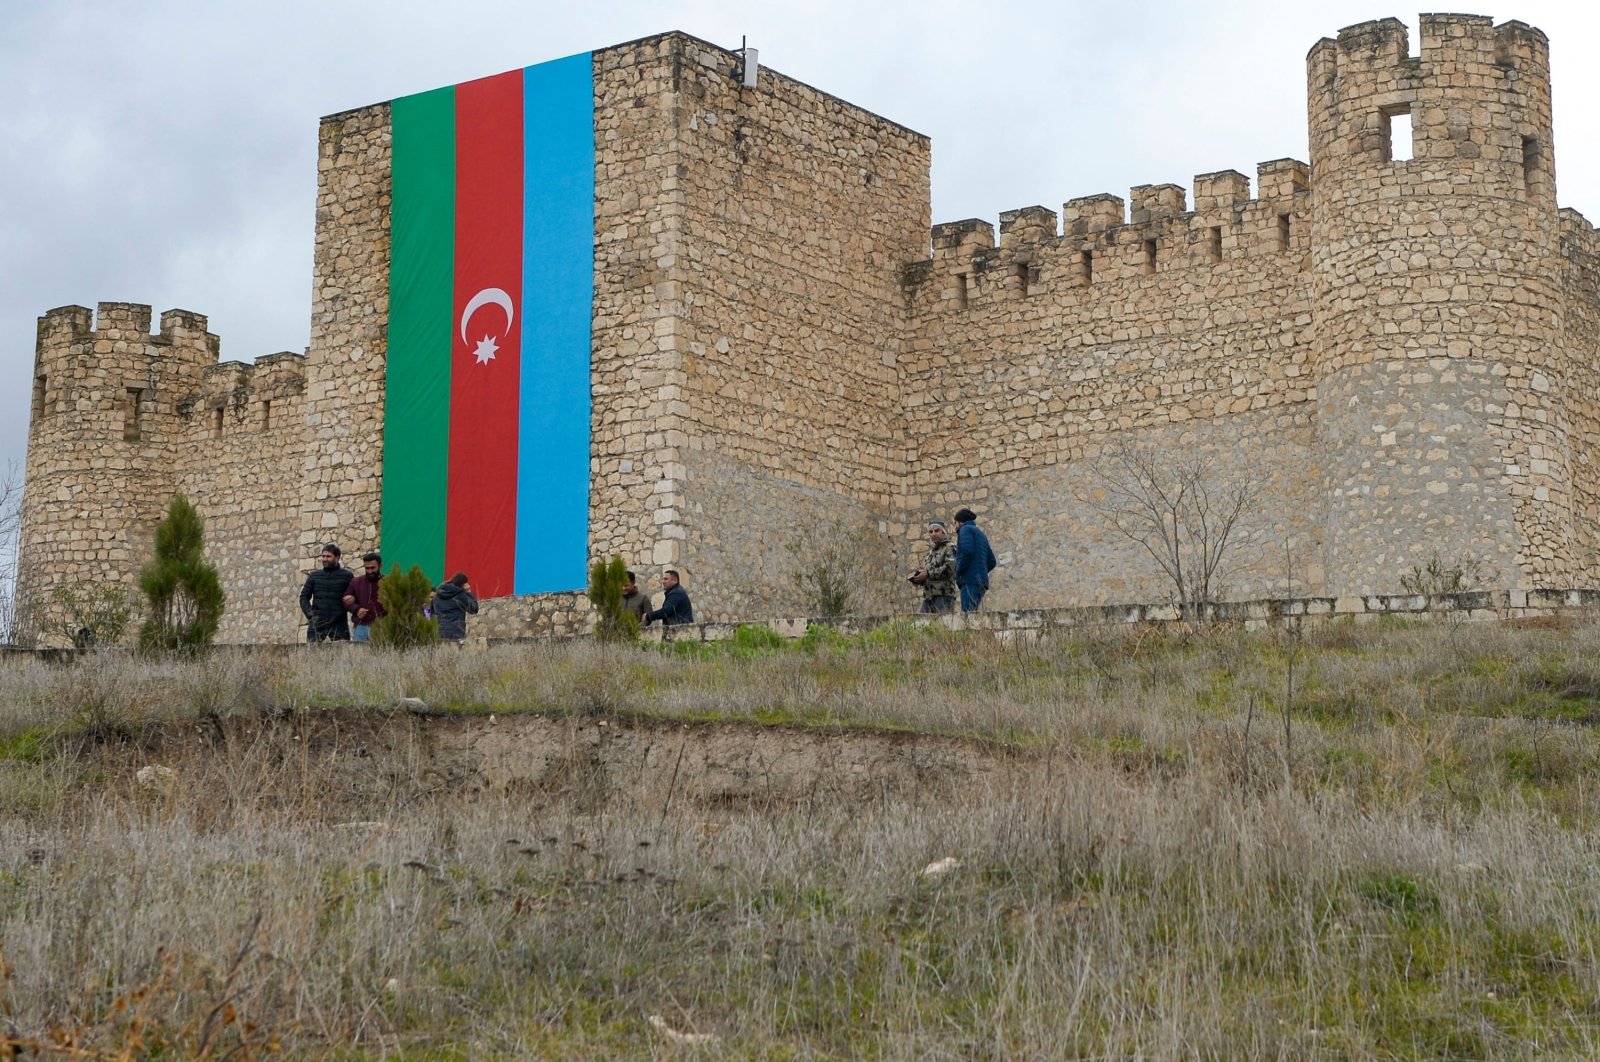 People walk in front of the Azerbaijani flag decorating Shahbulag Castle outside Aghdam, Azerbaijan, March 12, 2022. (AFP Photo)